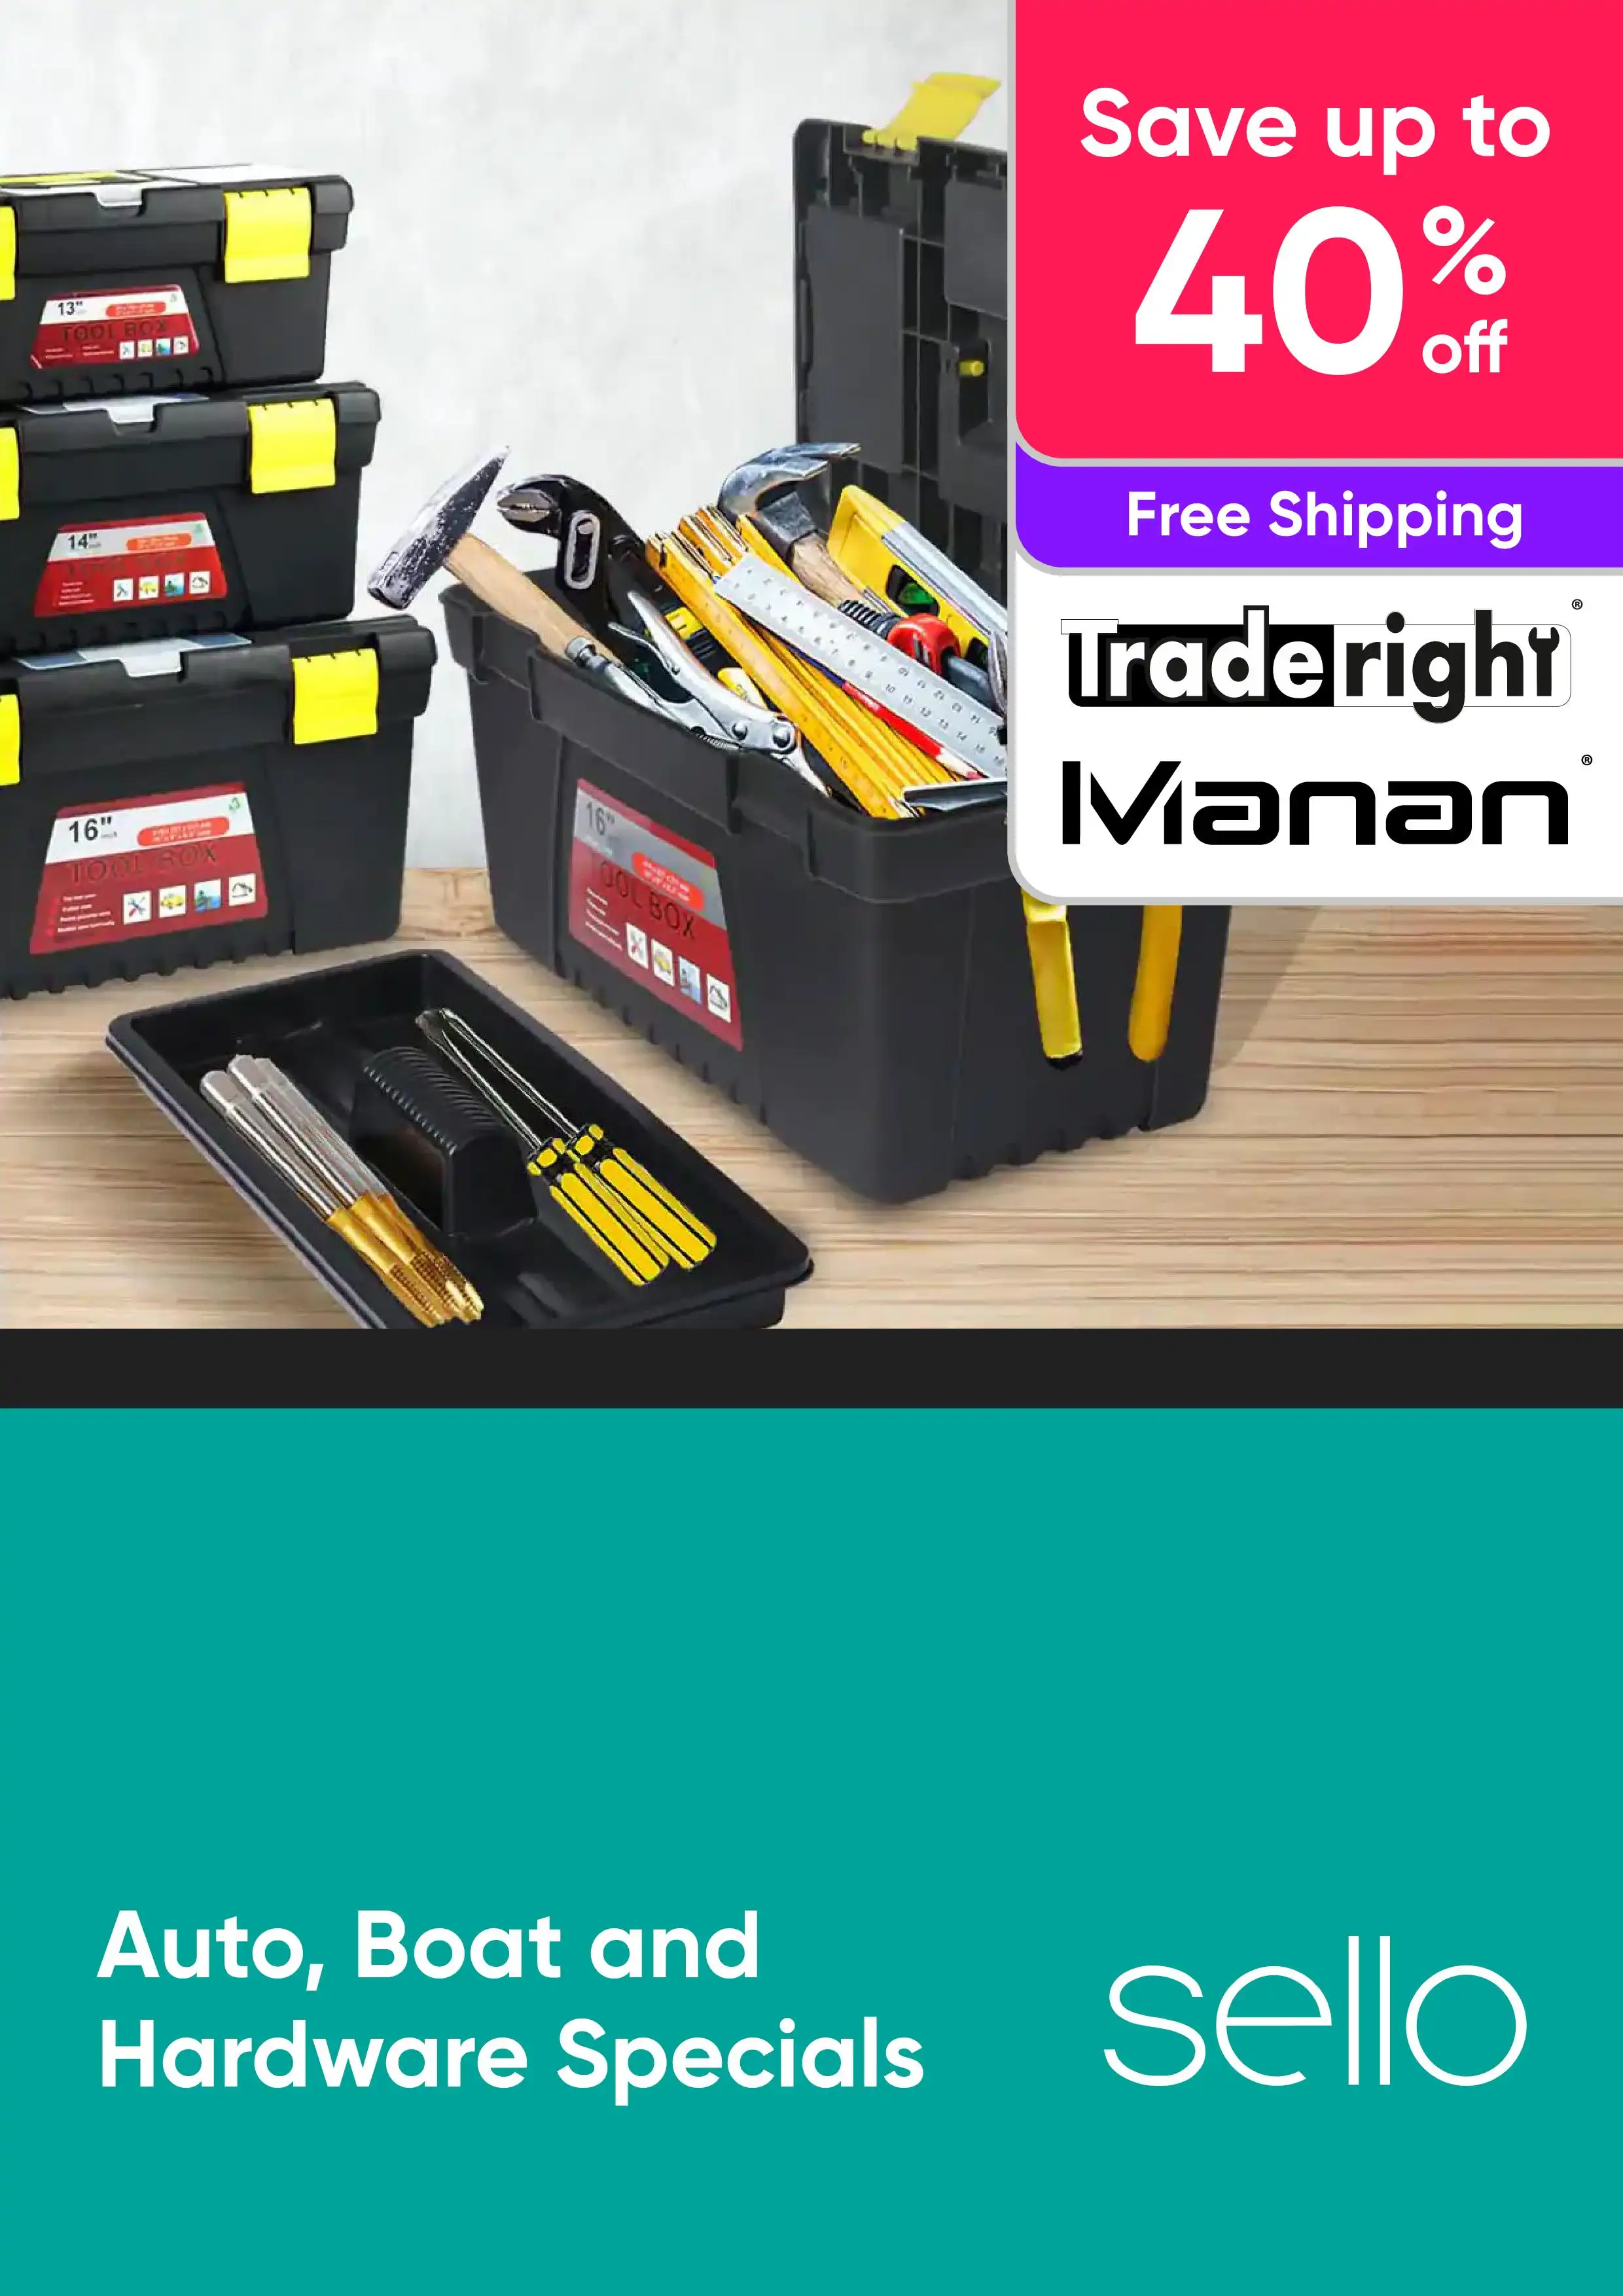 Auto, Boat and Hardware Specials - Traderight, Manan - Up to 40% Off